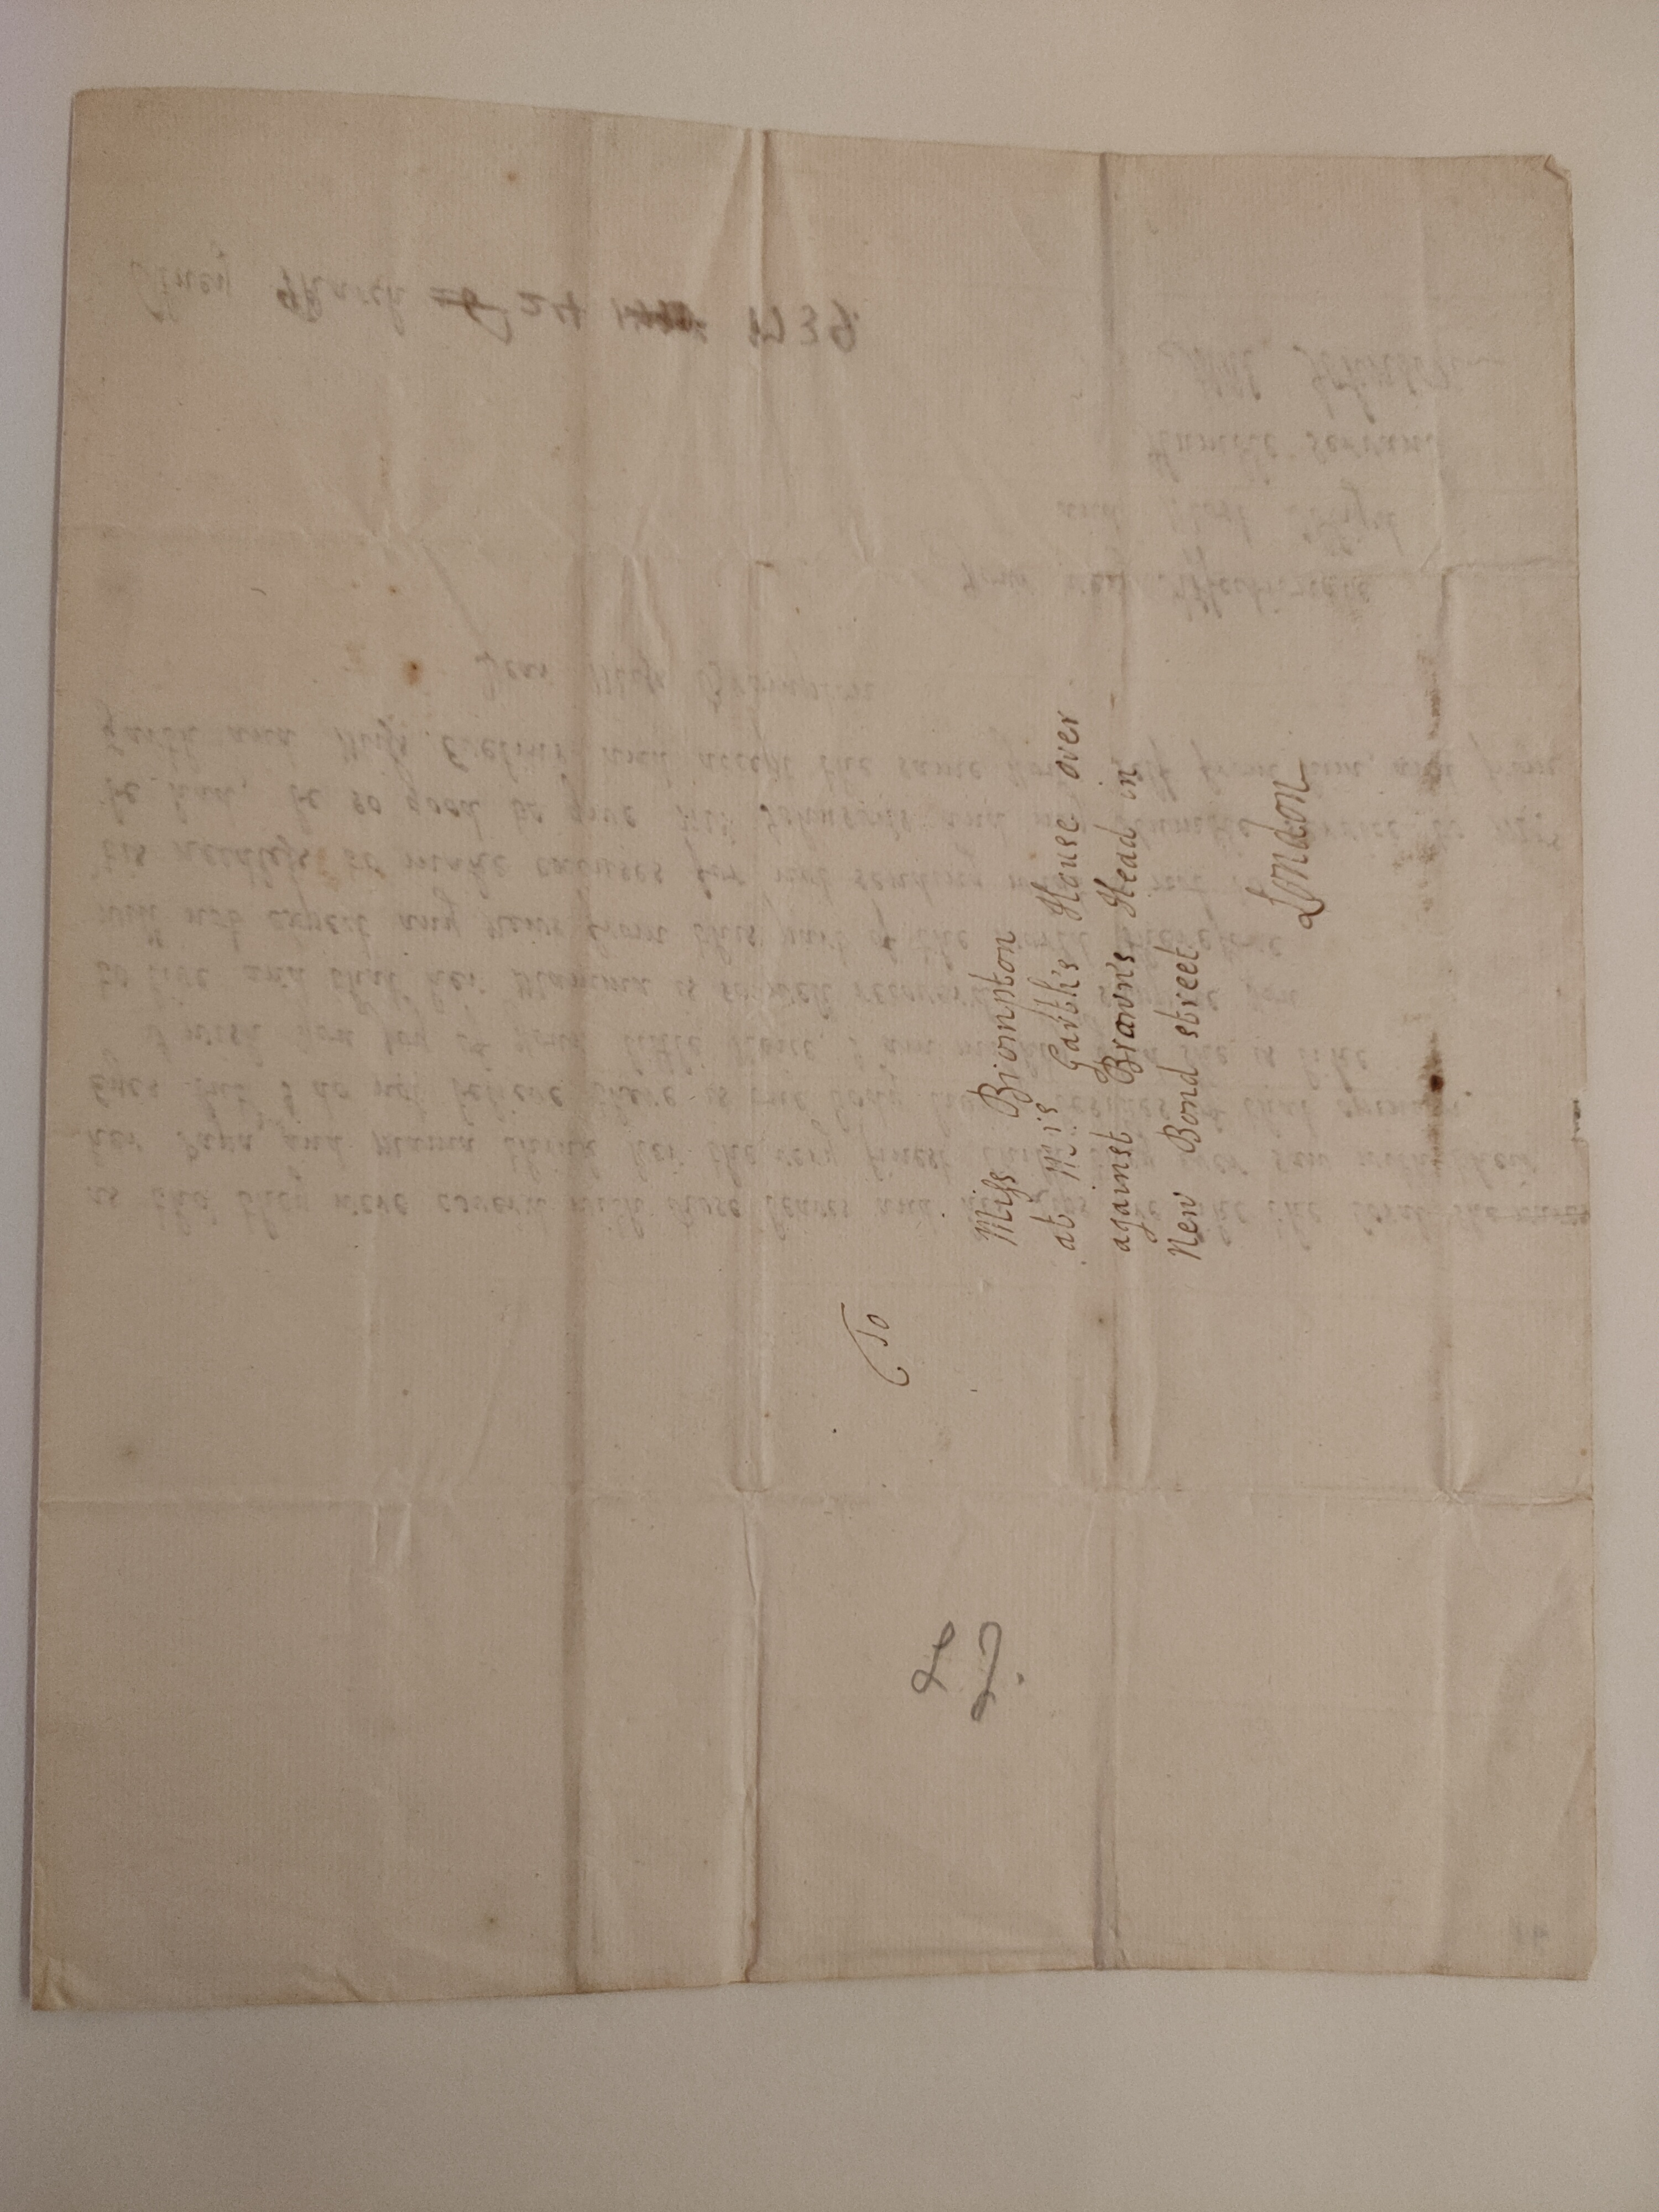 Image #3 of letter: Jane Johnson to Miss Brompton, 24 Mar 1739